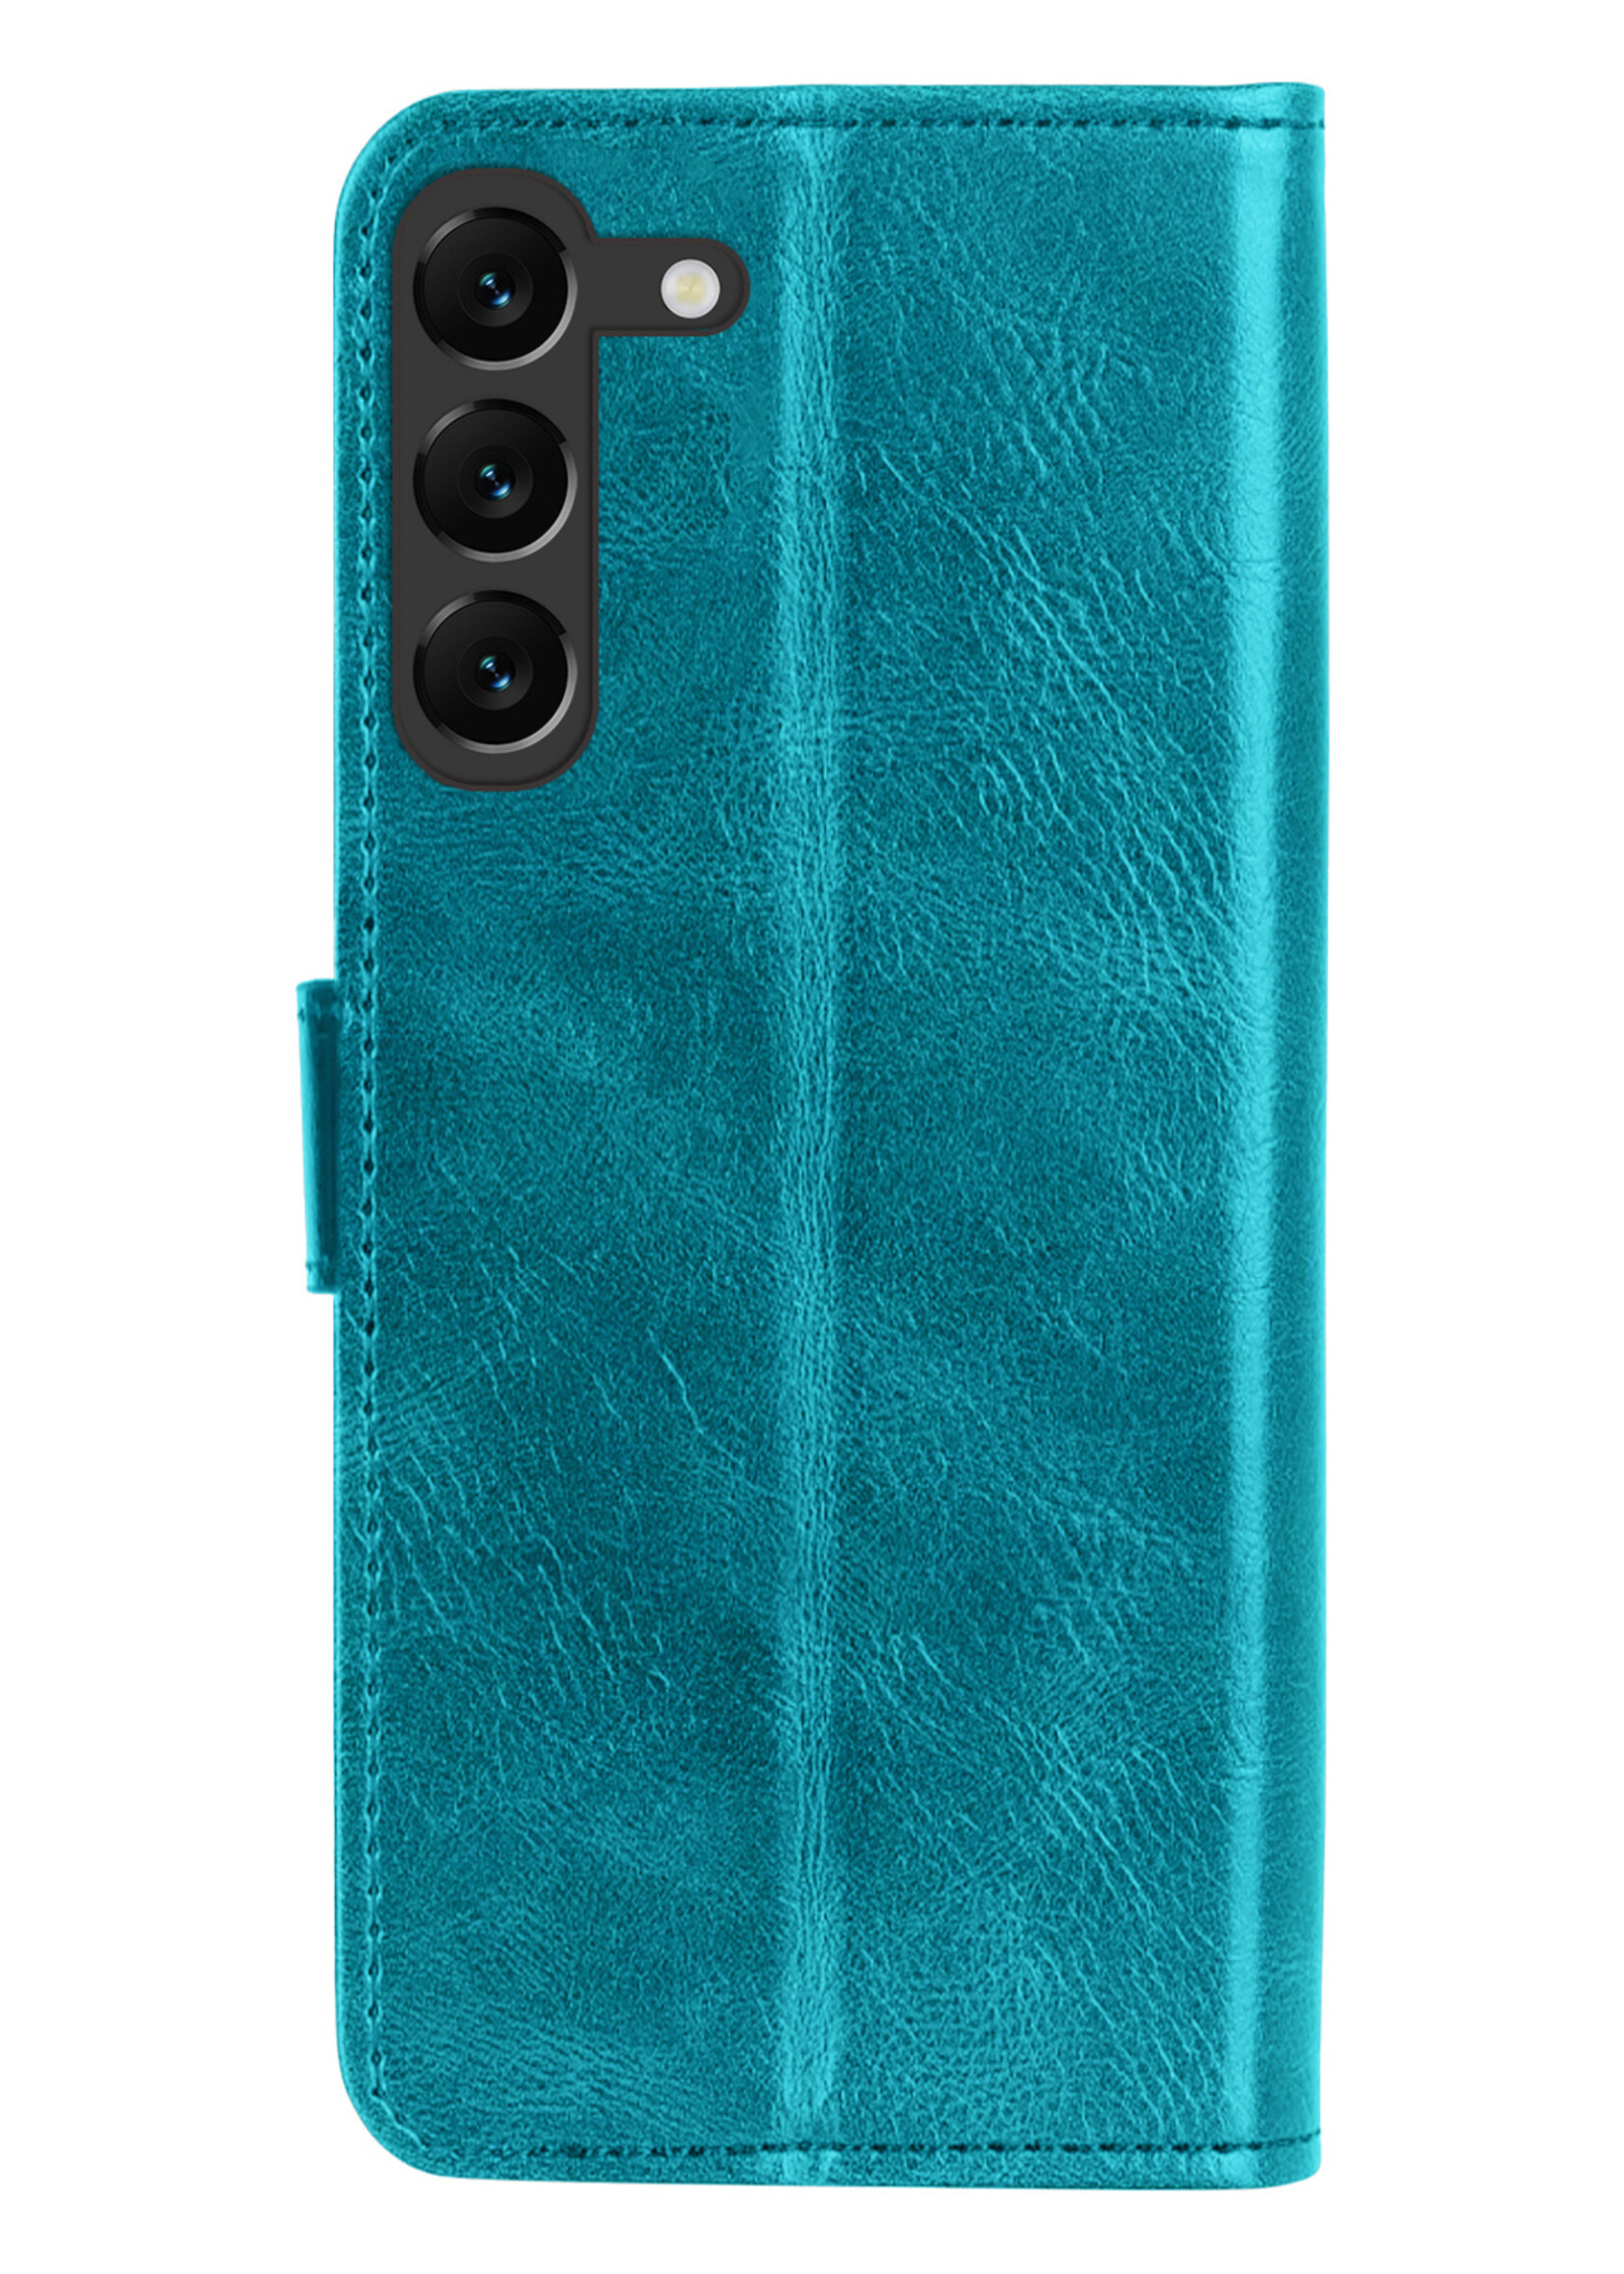 BTH Samsung S23 Hoesje Book Case Hoes Portemonnee Cover Walletcase - Samsung Galaxy S23 Hoes Bookcase Hoesje - Turquoise